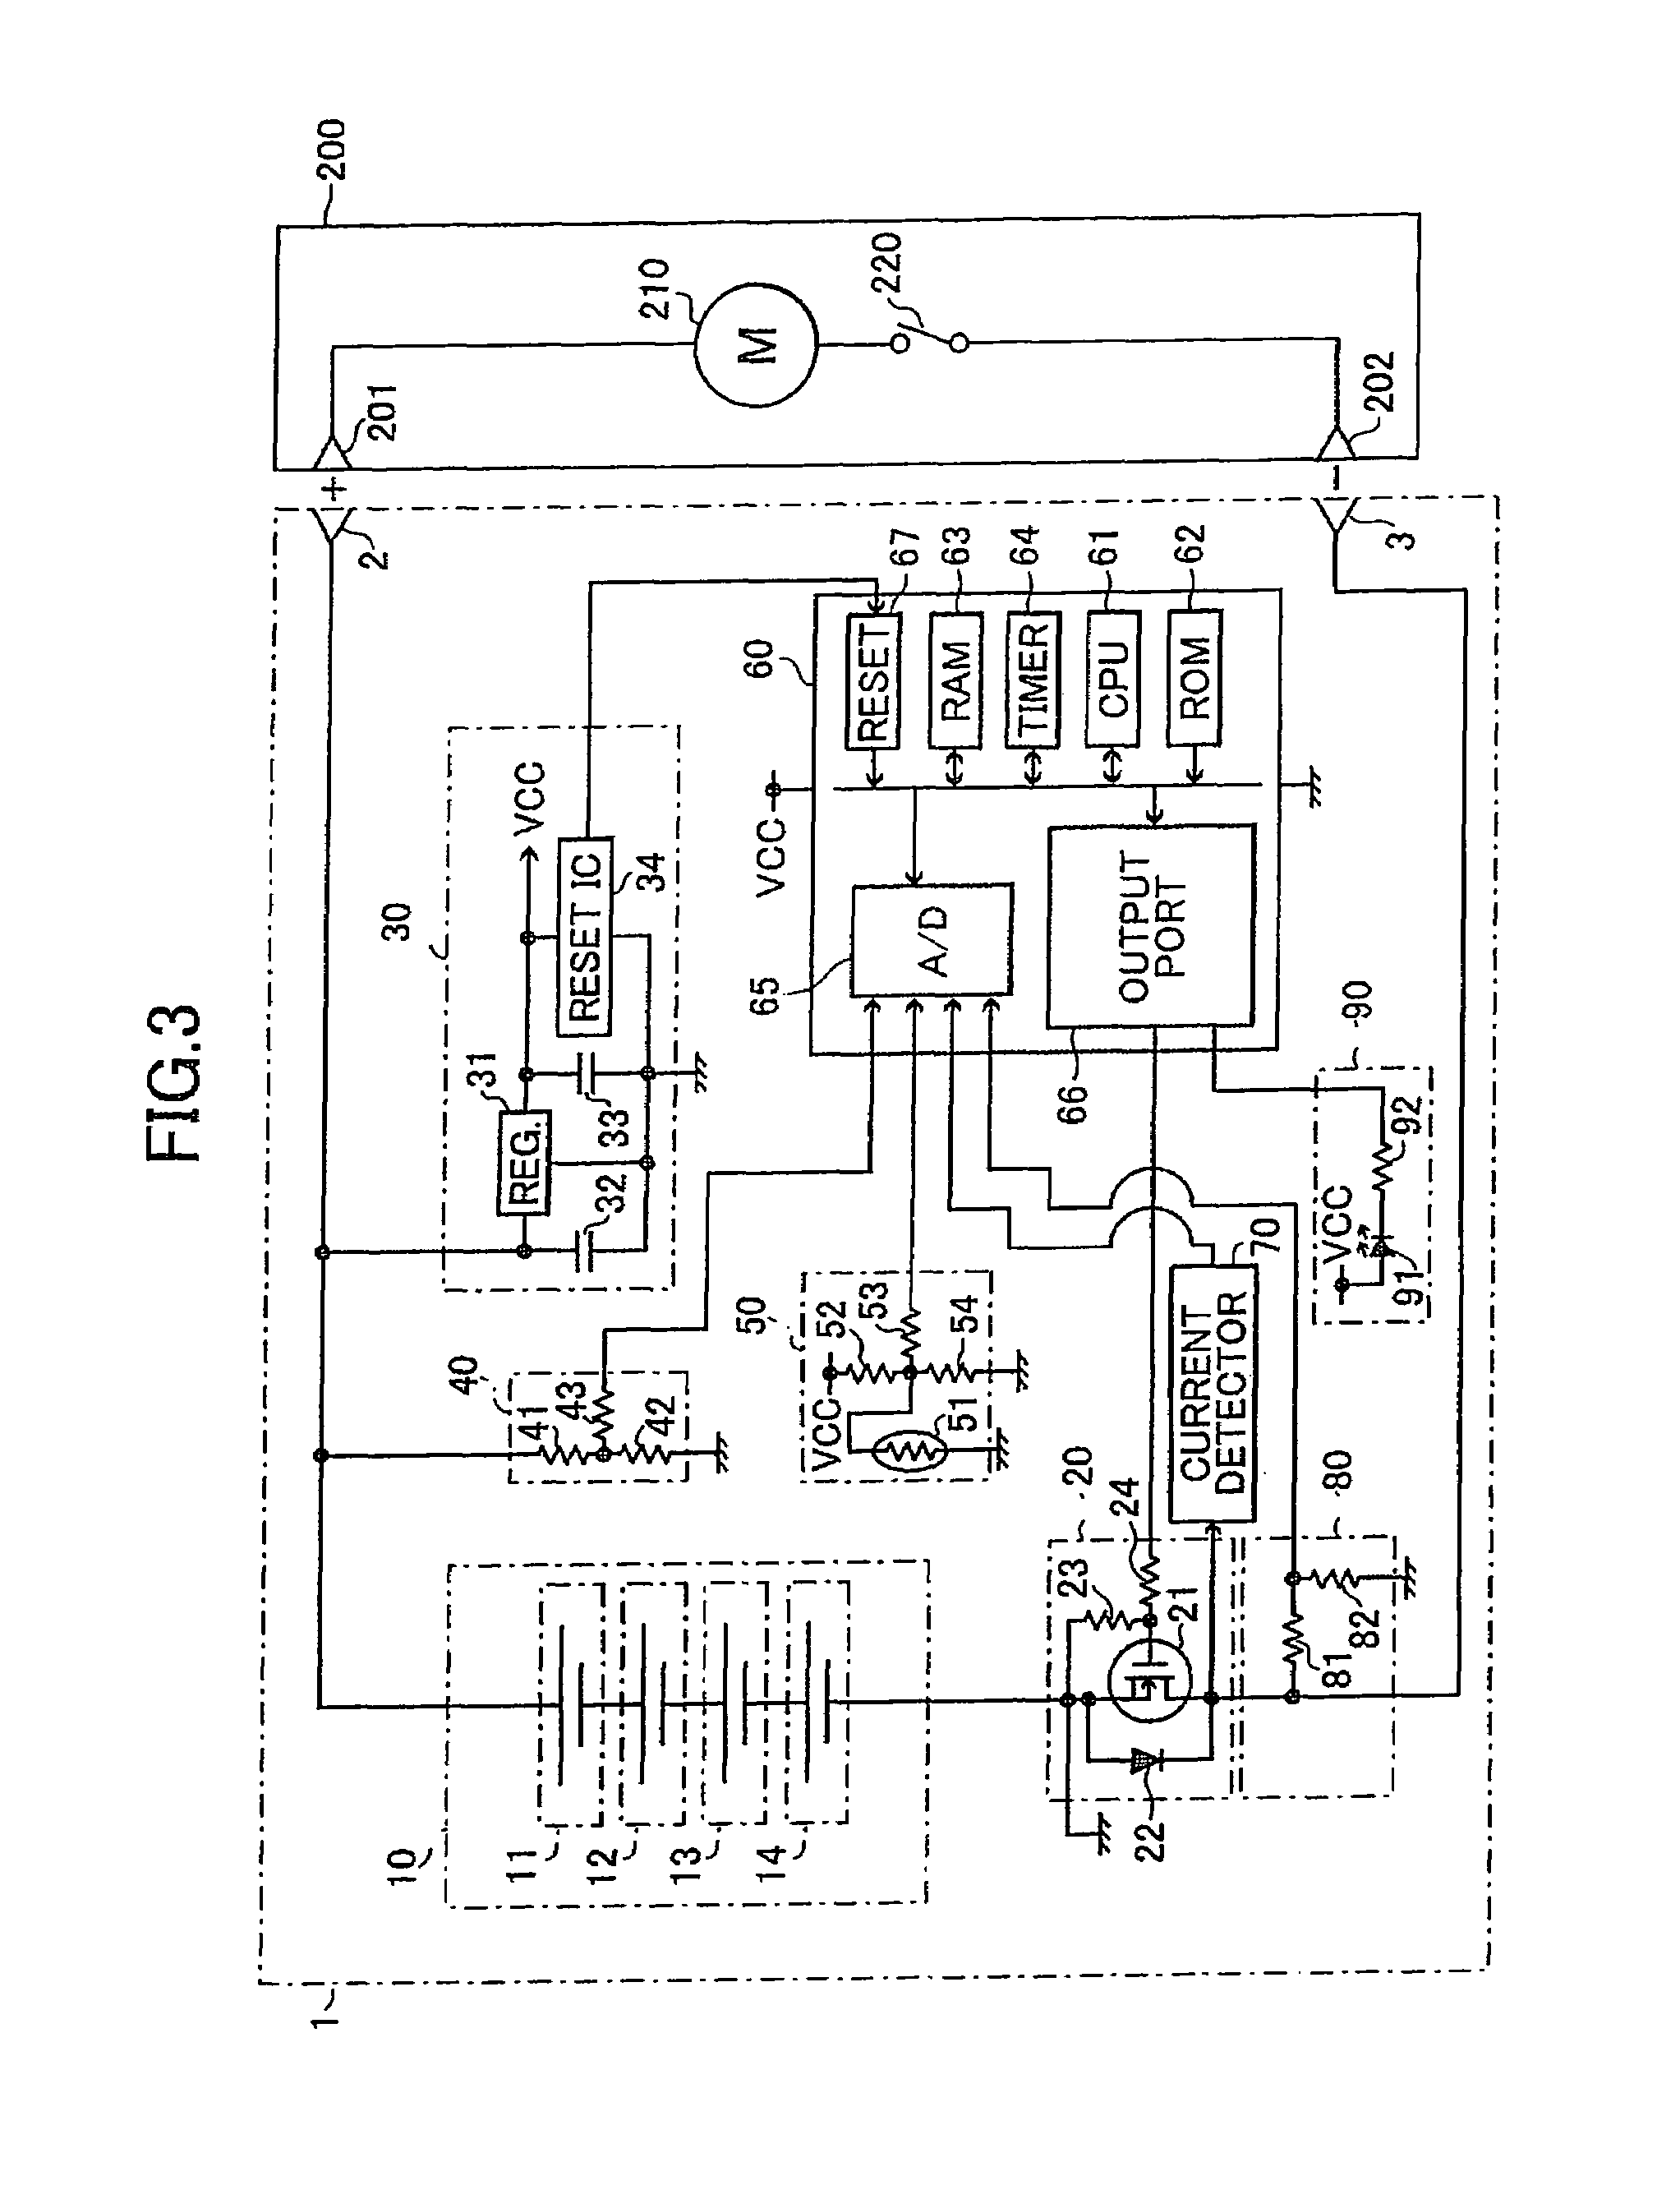 Cordless power tool with overcurrent protection circuit permitting the overcurrent condition during specified time periods